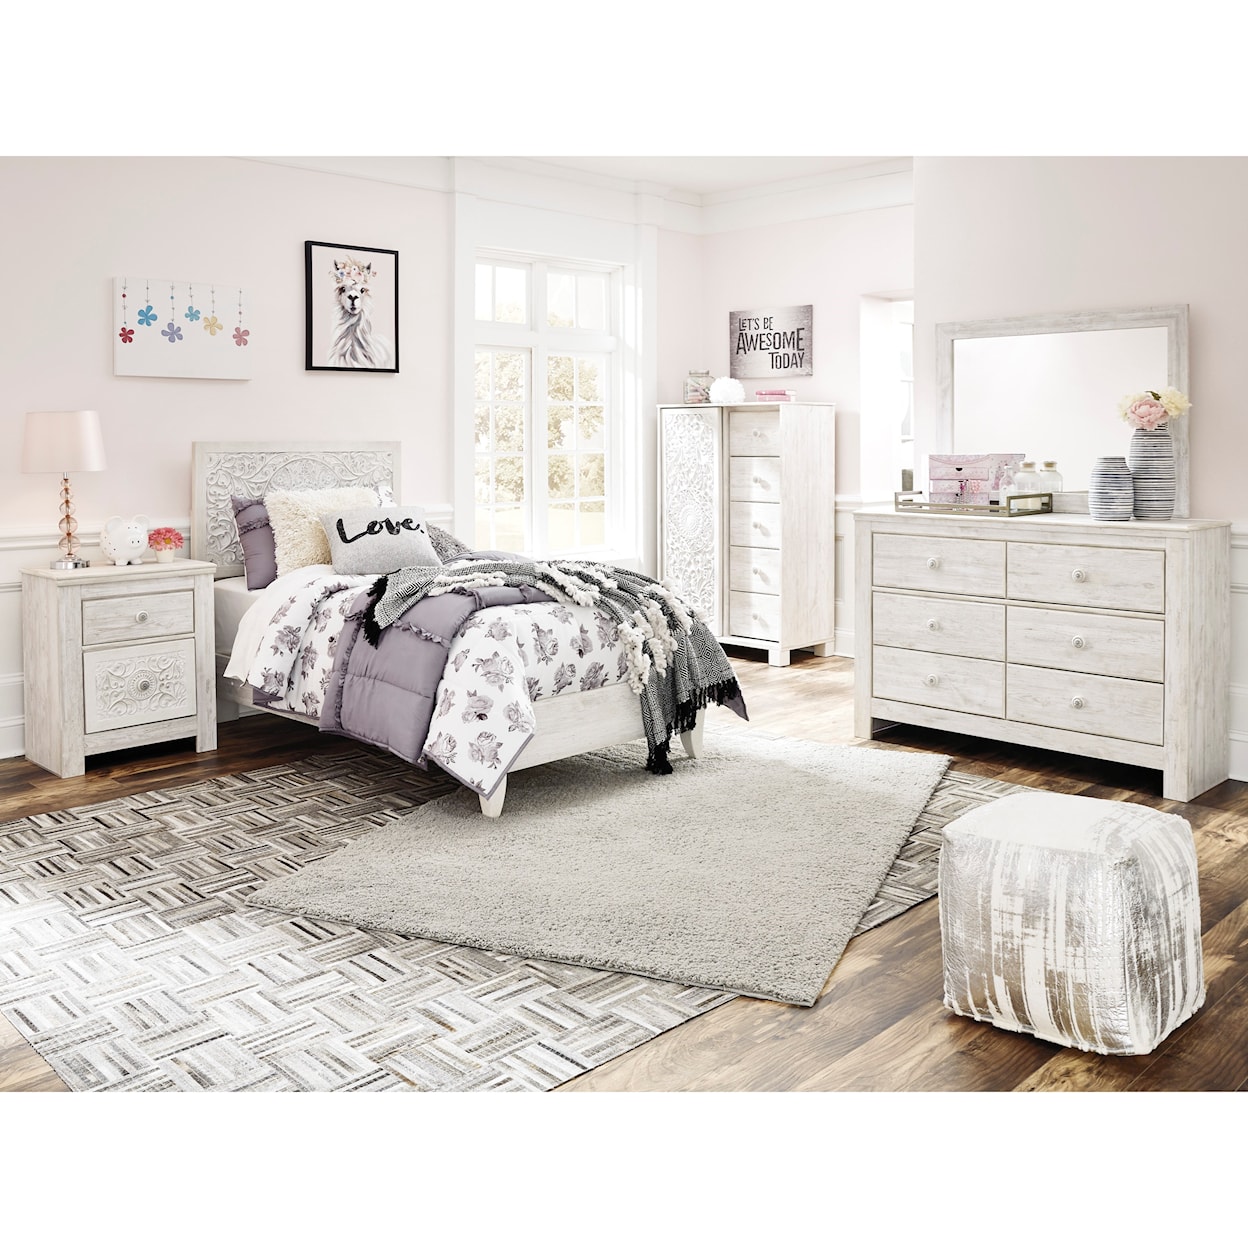 Ashley Furniture Signature Design Paxberry Twin Bedroom Group